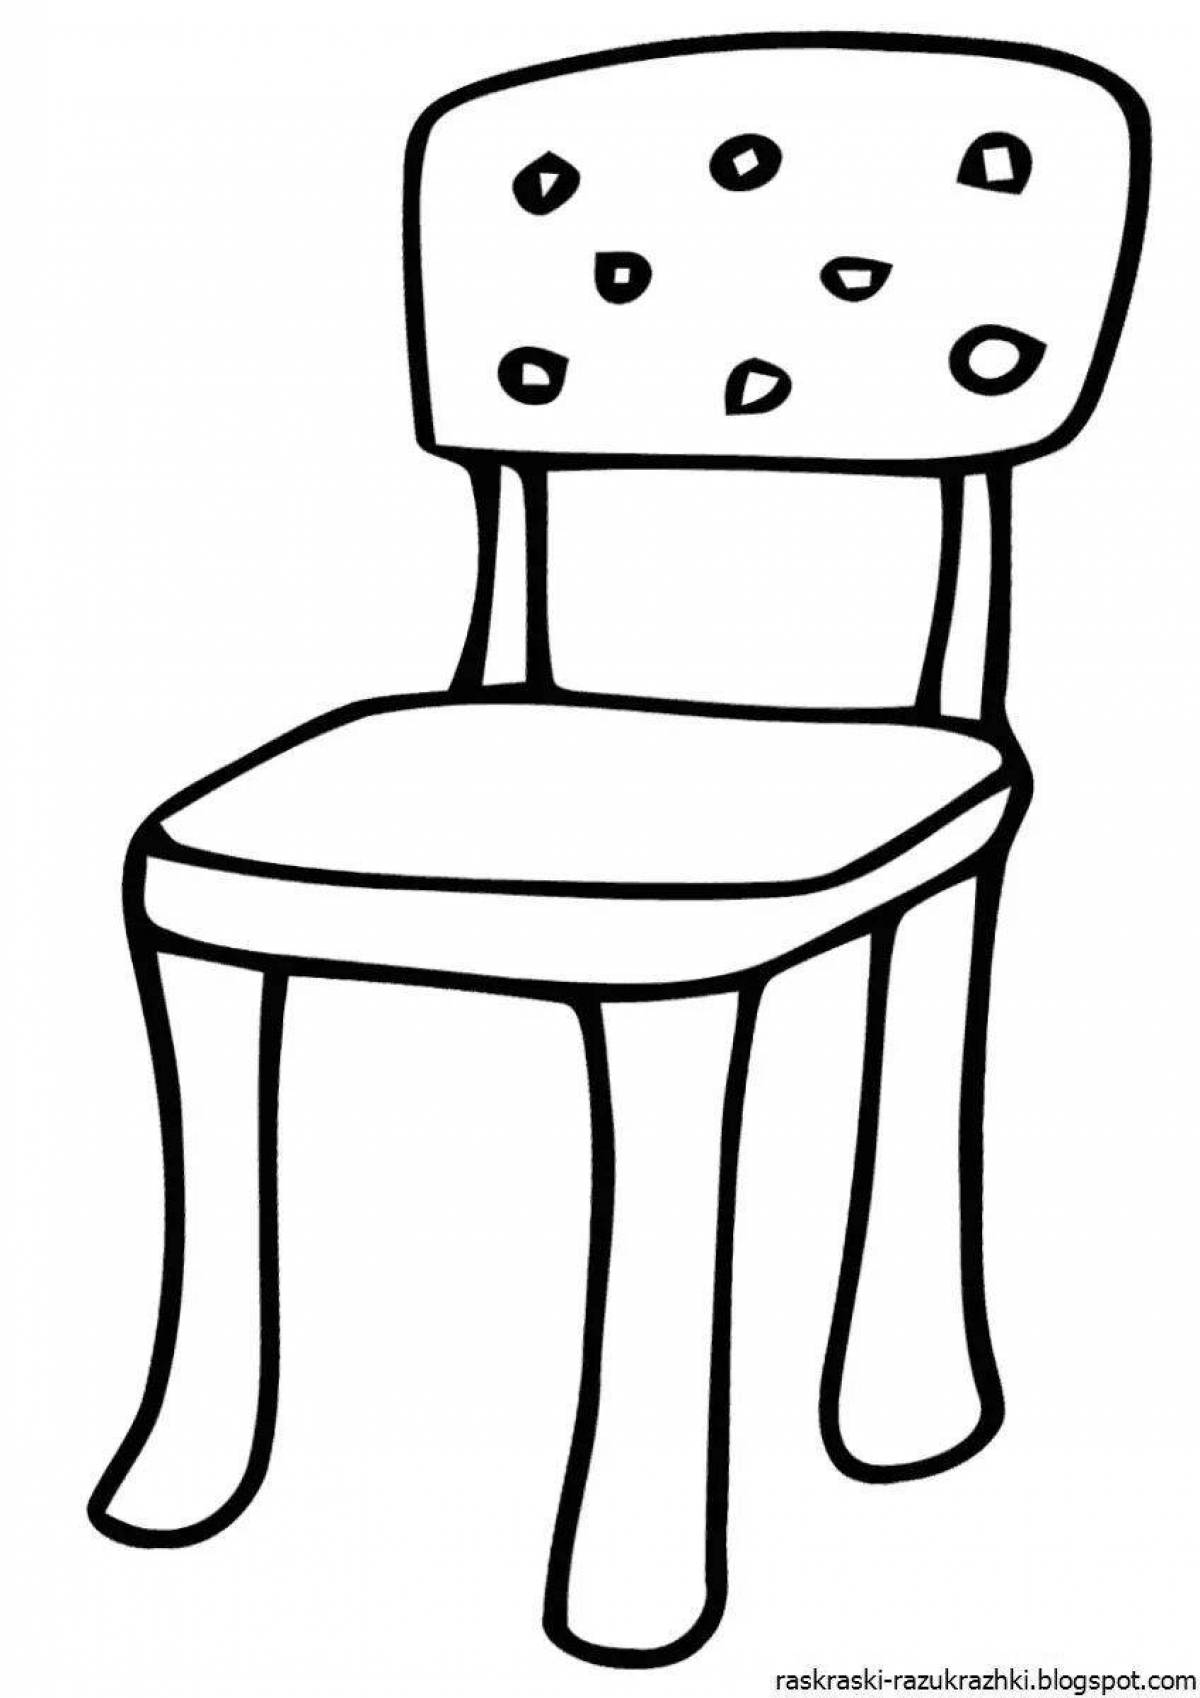 Adorable furniture coloring book for kids